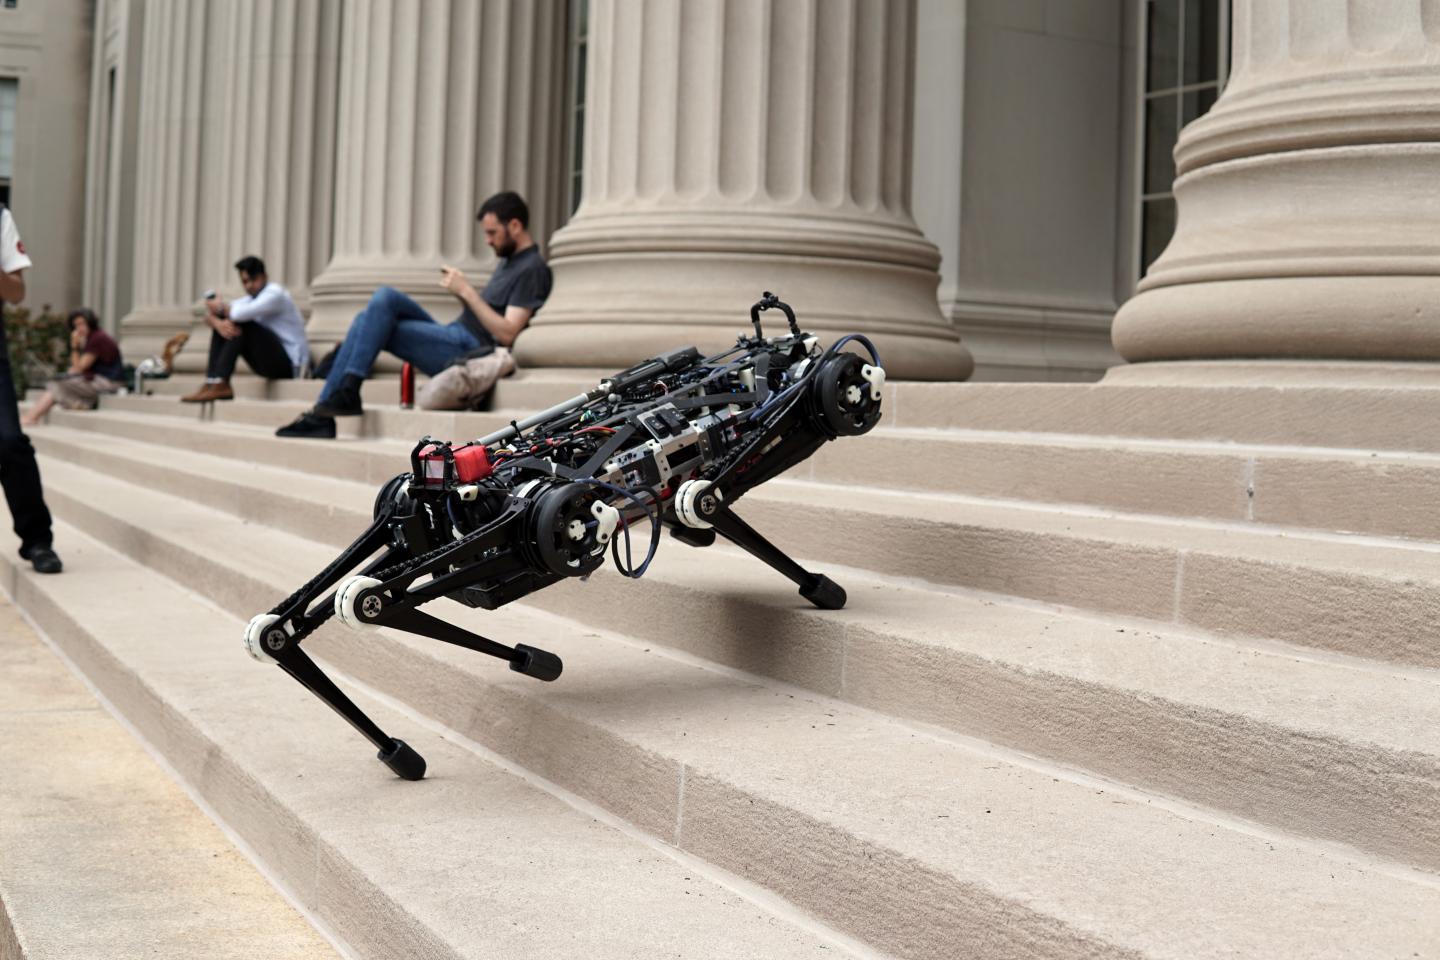 MIT's Cheetah 3 robot can climb stairs and step over obstacles without the help of cameras or visual sensors. (Source: MIT)